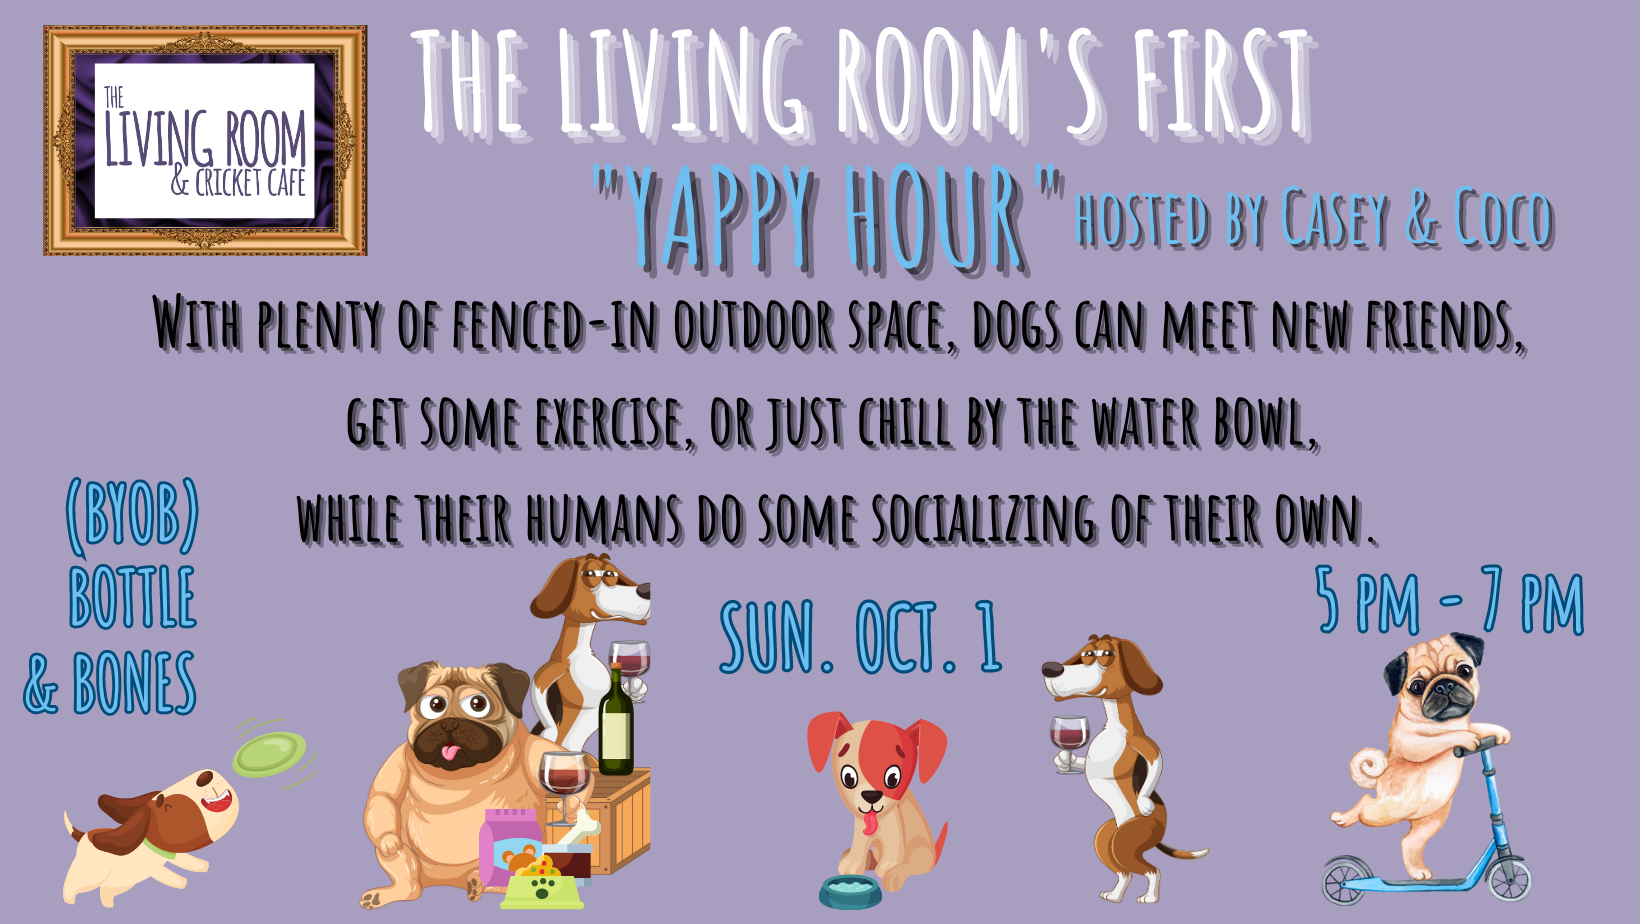 SUN. OCT. 1: The Living Room's First "Yappy Hour"